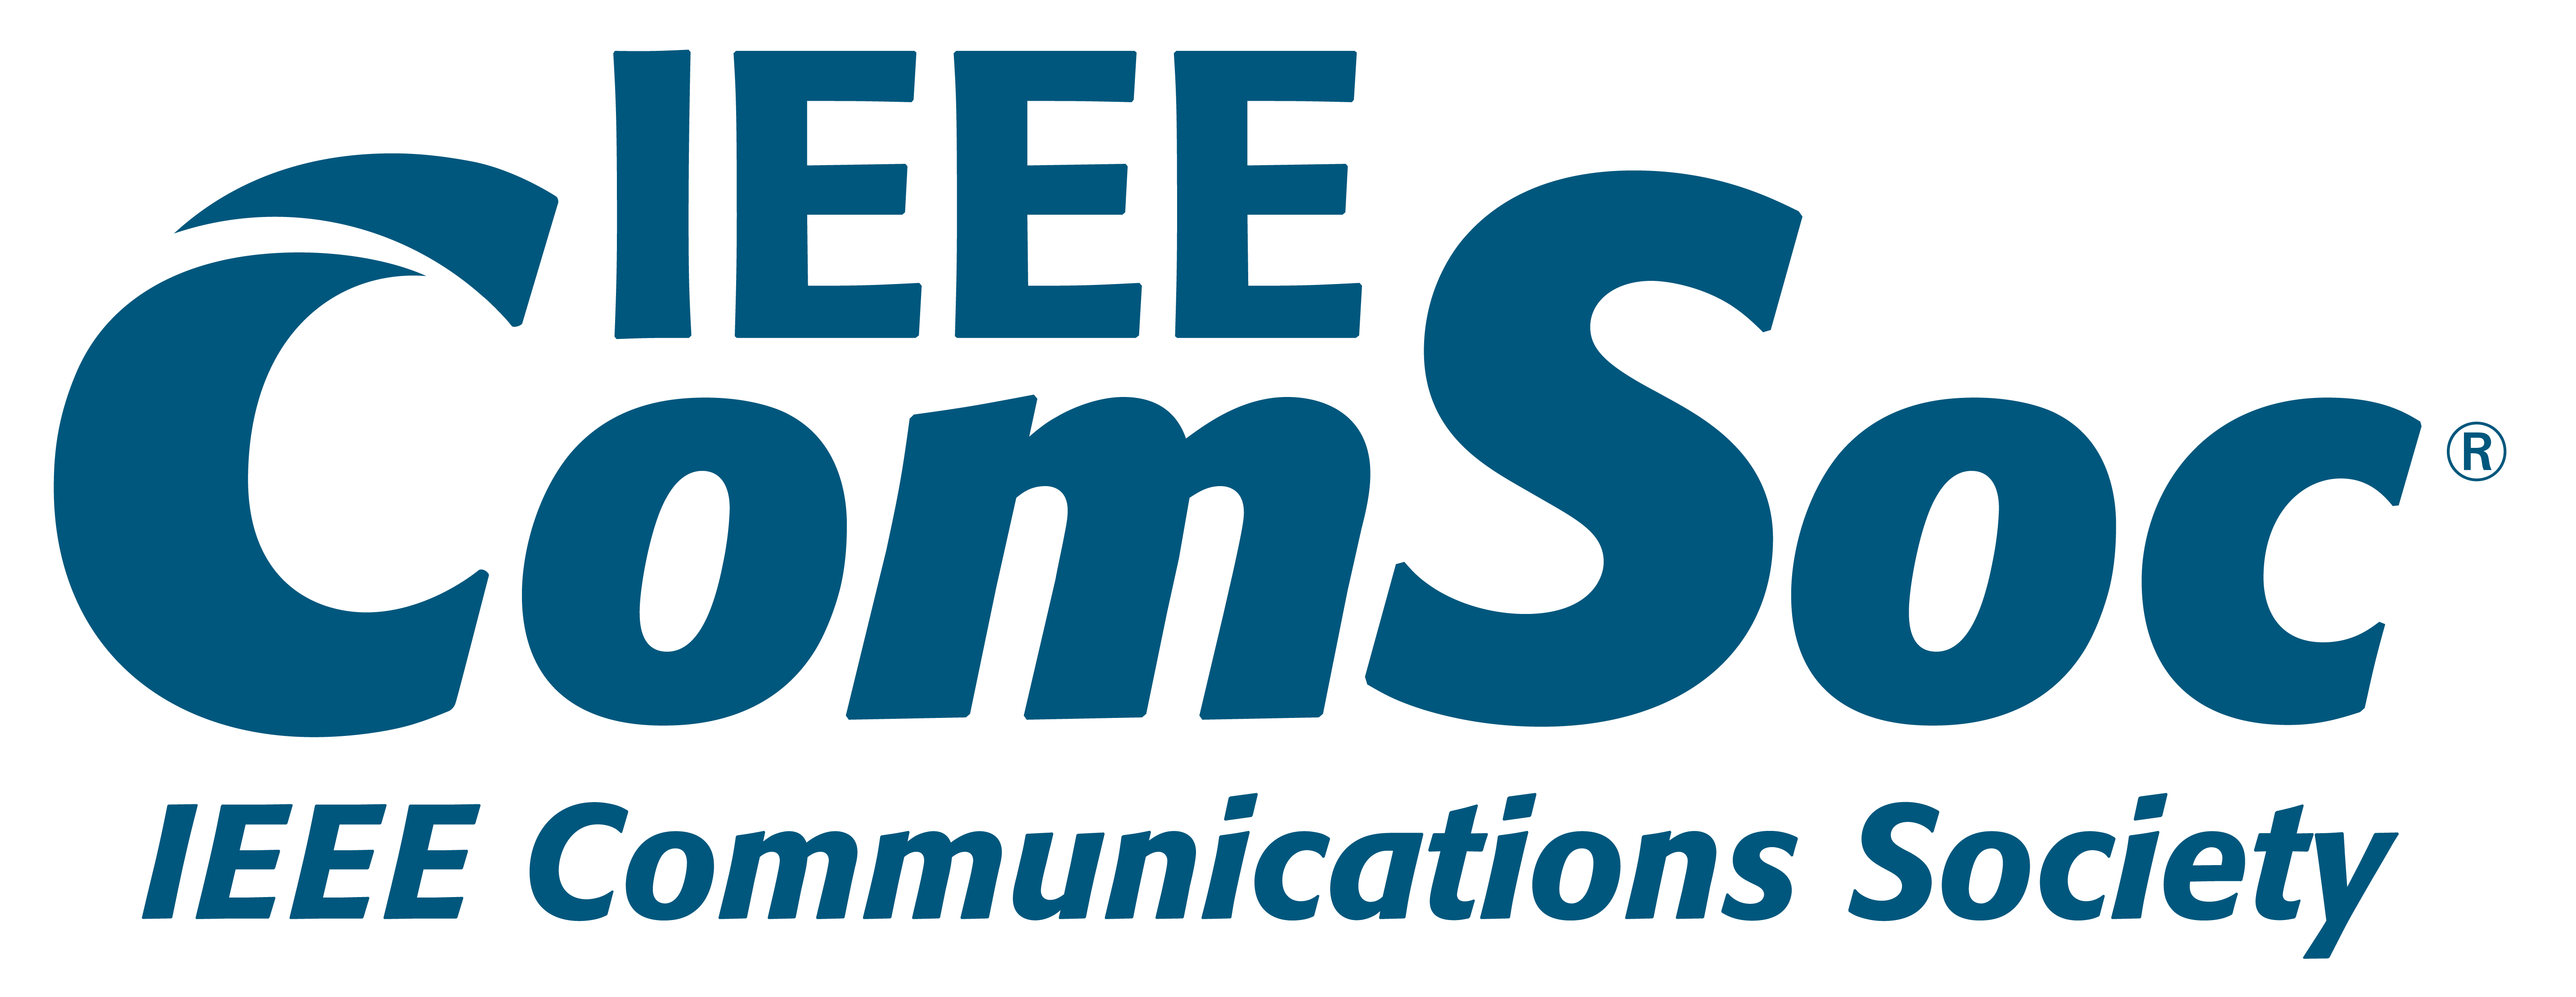 Technically co-sponsored by IEEE Communications Society